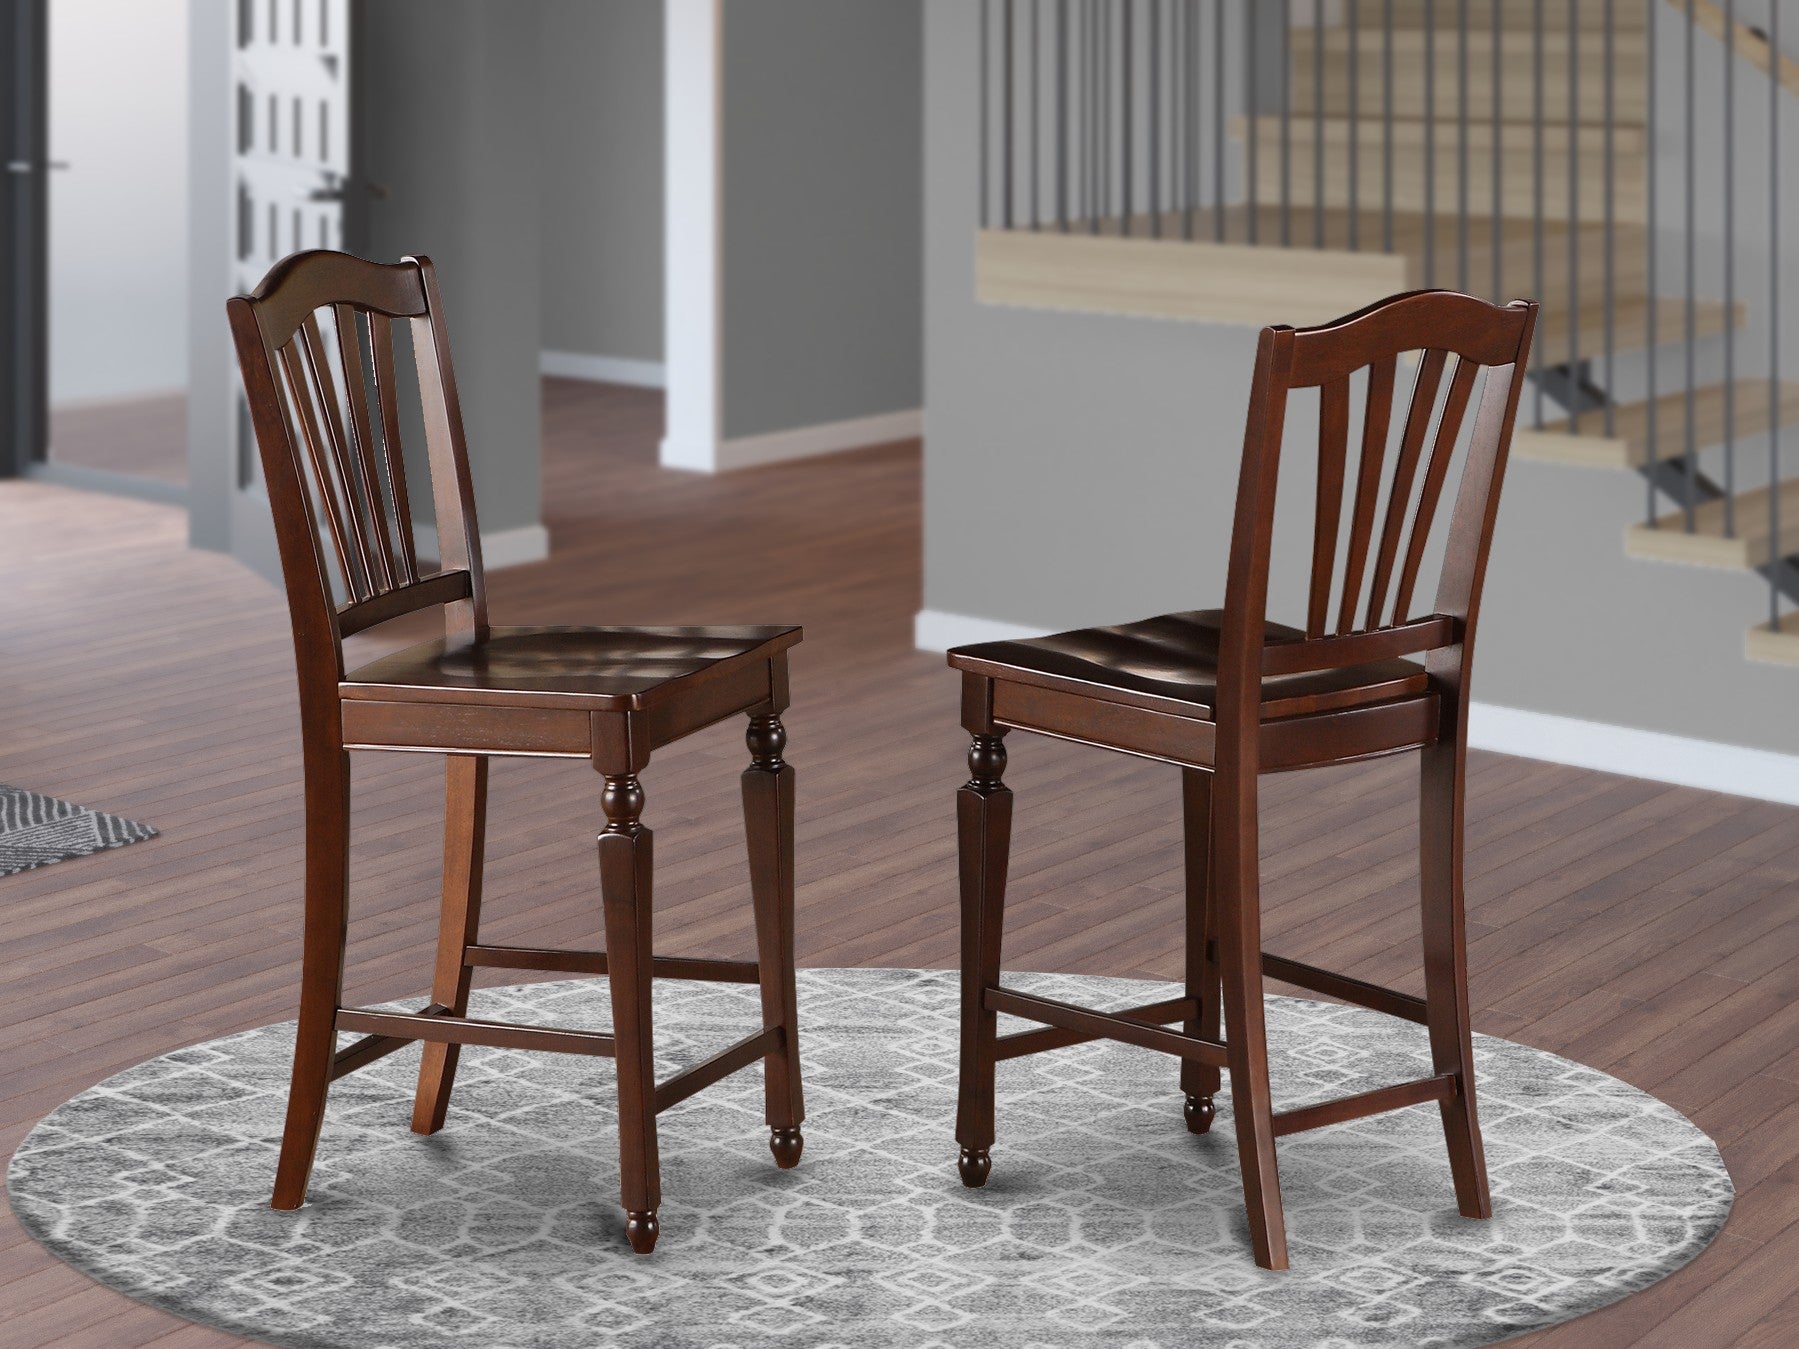 CHS-MAH-W Chelsea Stools with wood seat, 24" seat height